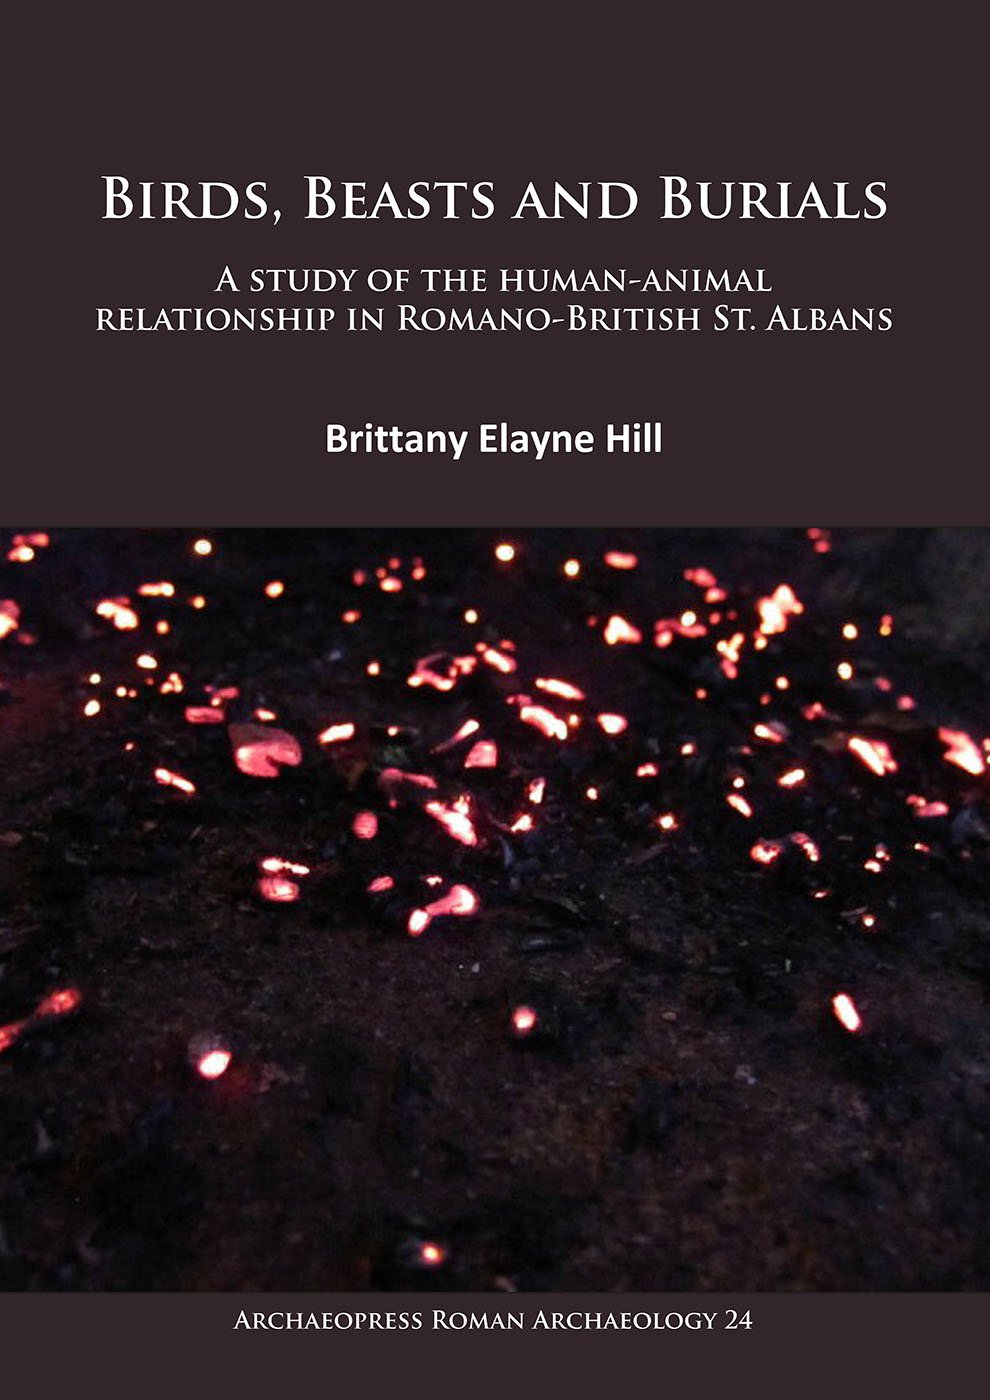 Birds, Beasts and Burials | Brittany Elayne Hill